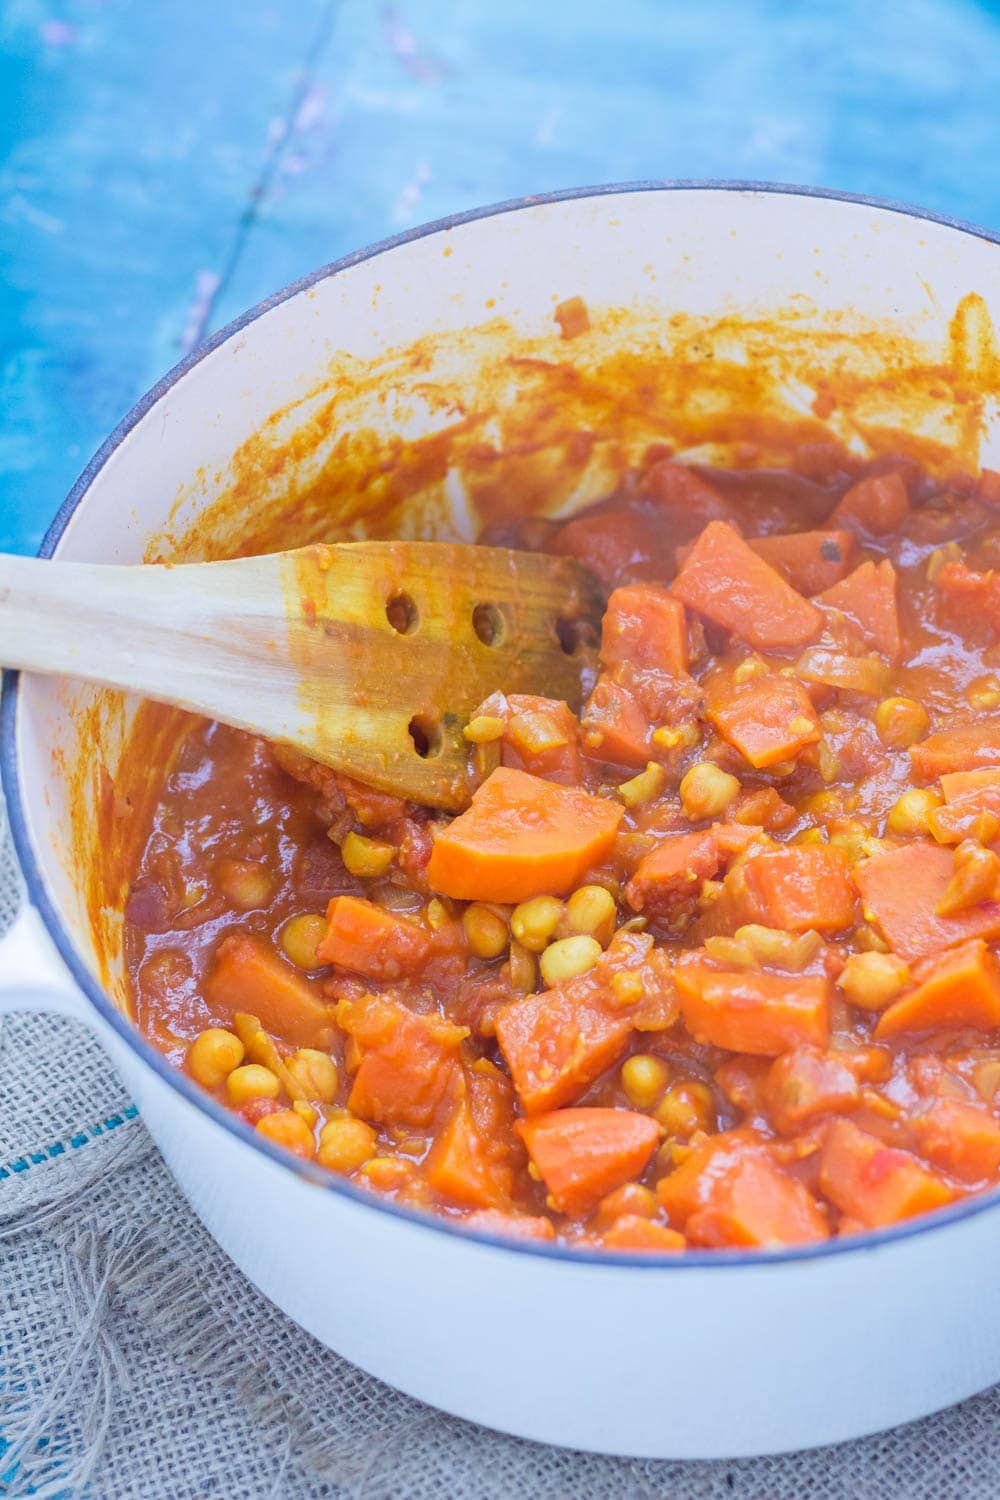 This peanut and sweet potato stew is spicy, filling and delicious. Add all your favourite toppings and serve with a healthy portion of rice or other grain. #vegetarian #comfortfood #healthy